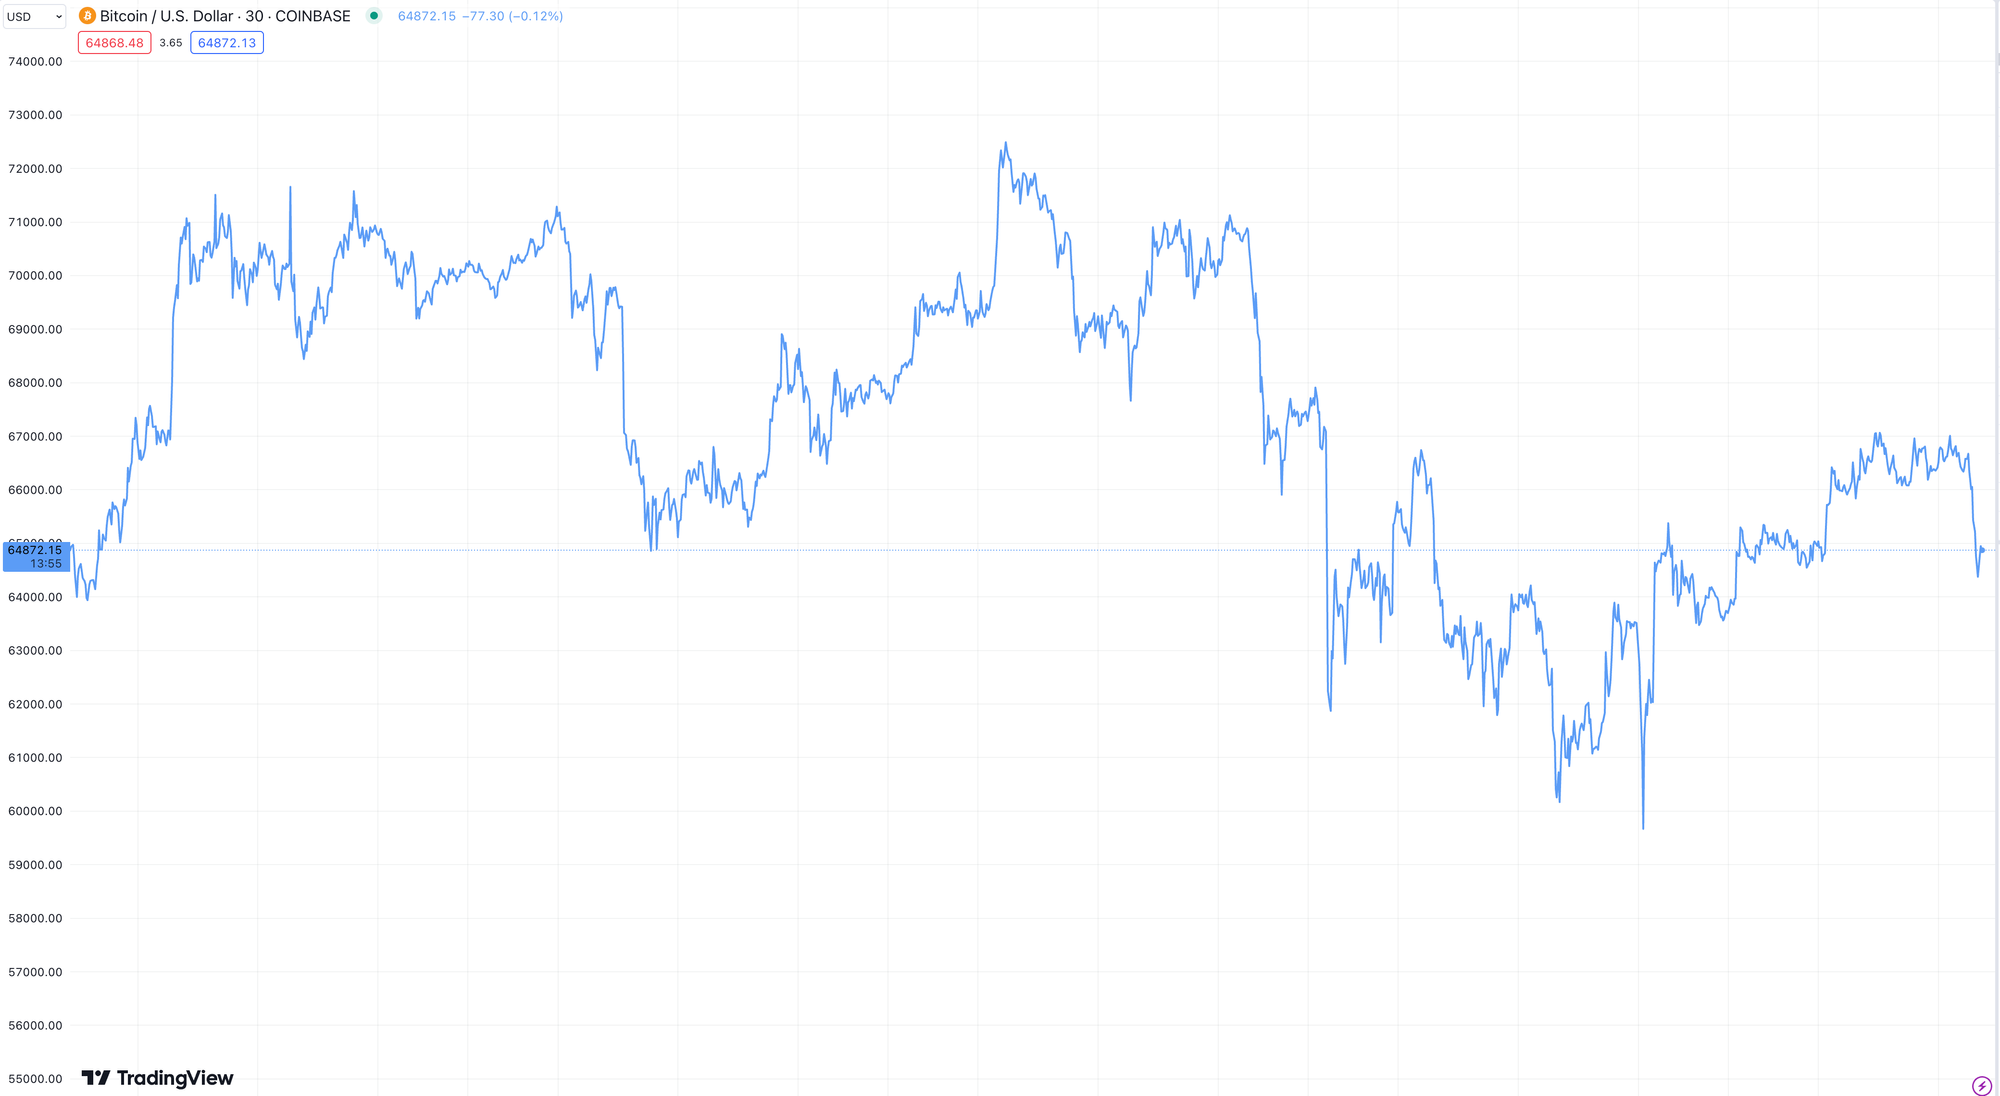 A chart of Bitcoin prices fluctuating between around $40,000 and around $74,000